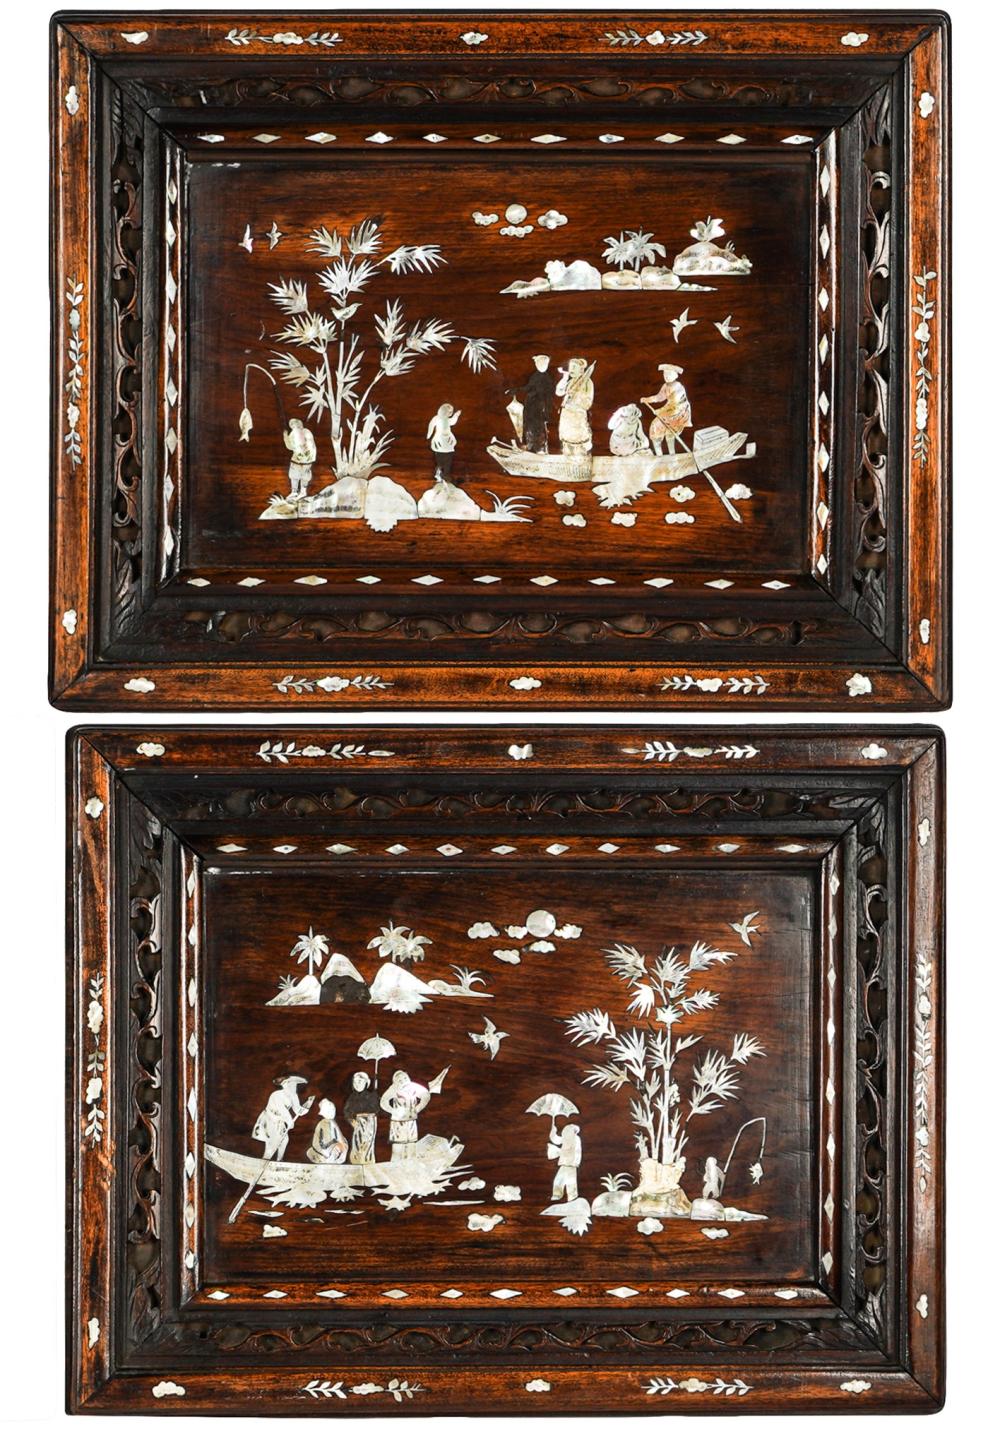 PAIR OF ASIAN MOTHER OF PEARL-INLAID